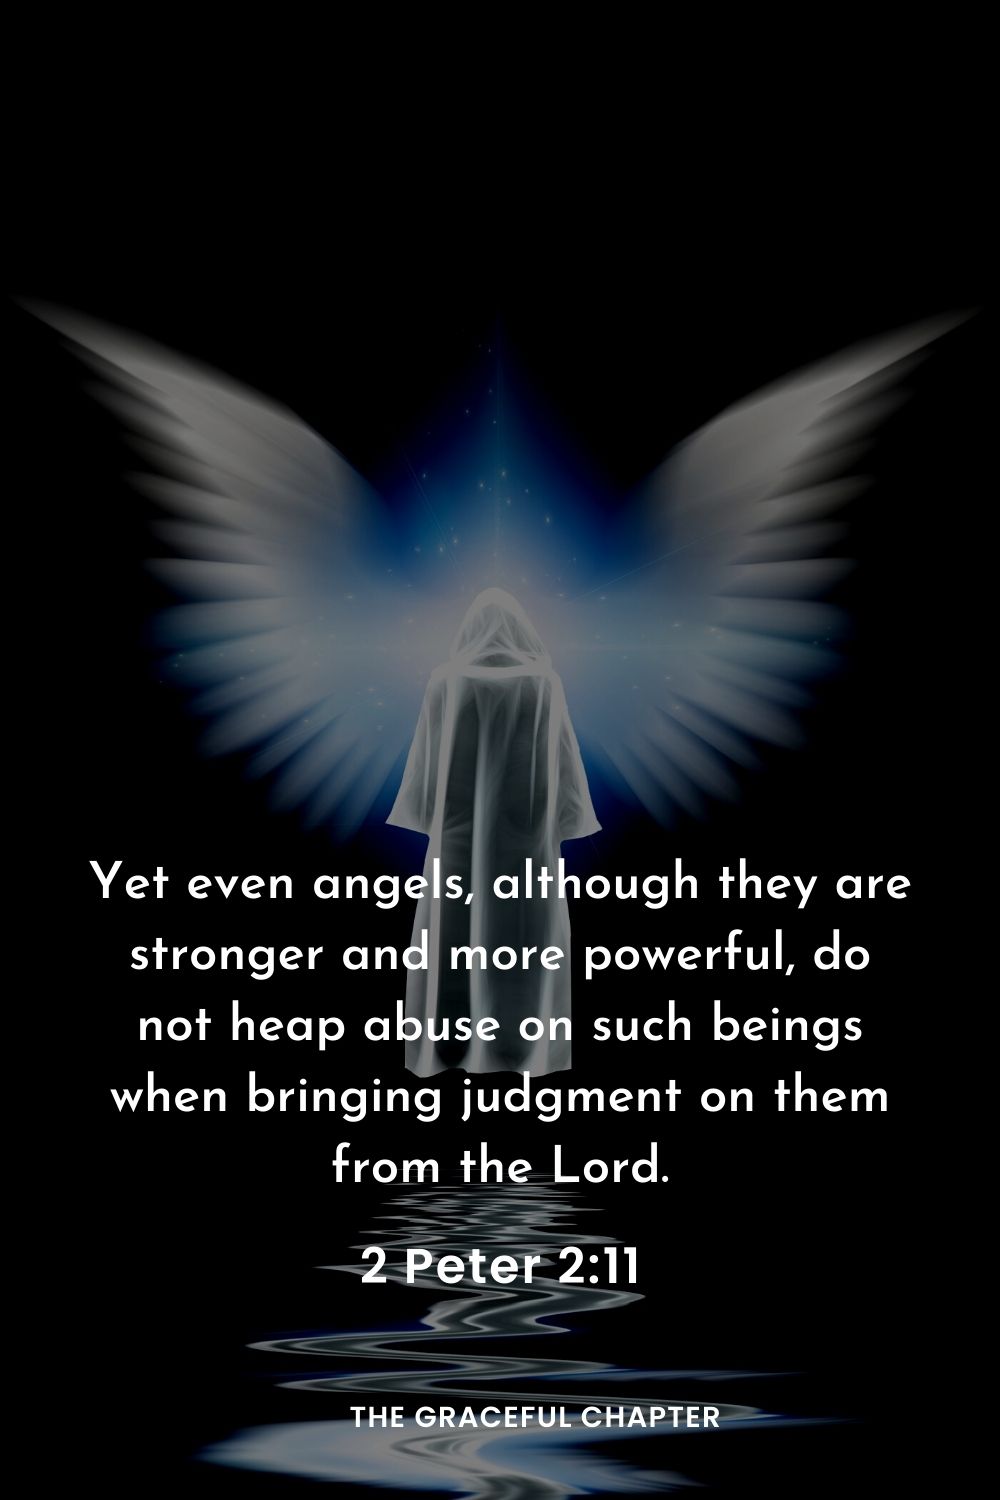 Yet even angels, although they are stronger and more powerful, do not heap abuse on such beings when bringing judgment on them from the Lord.